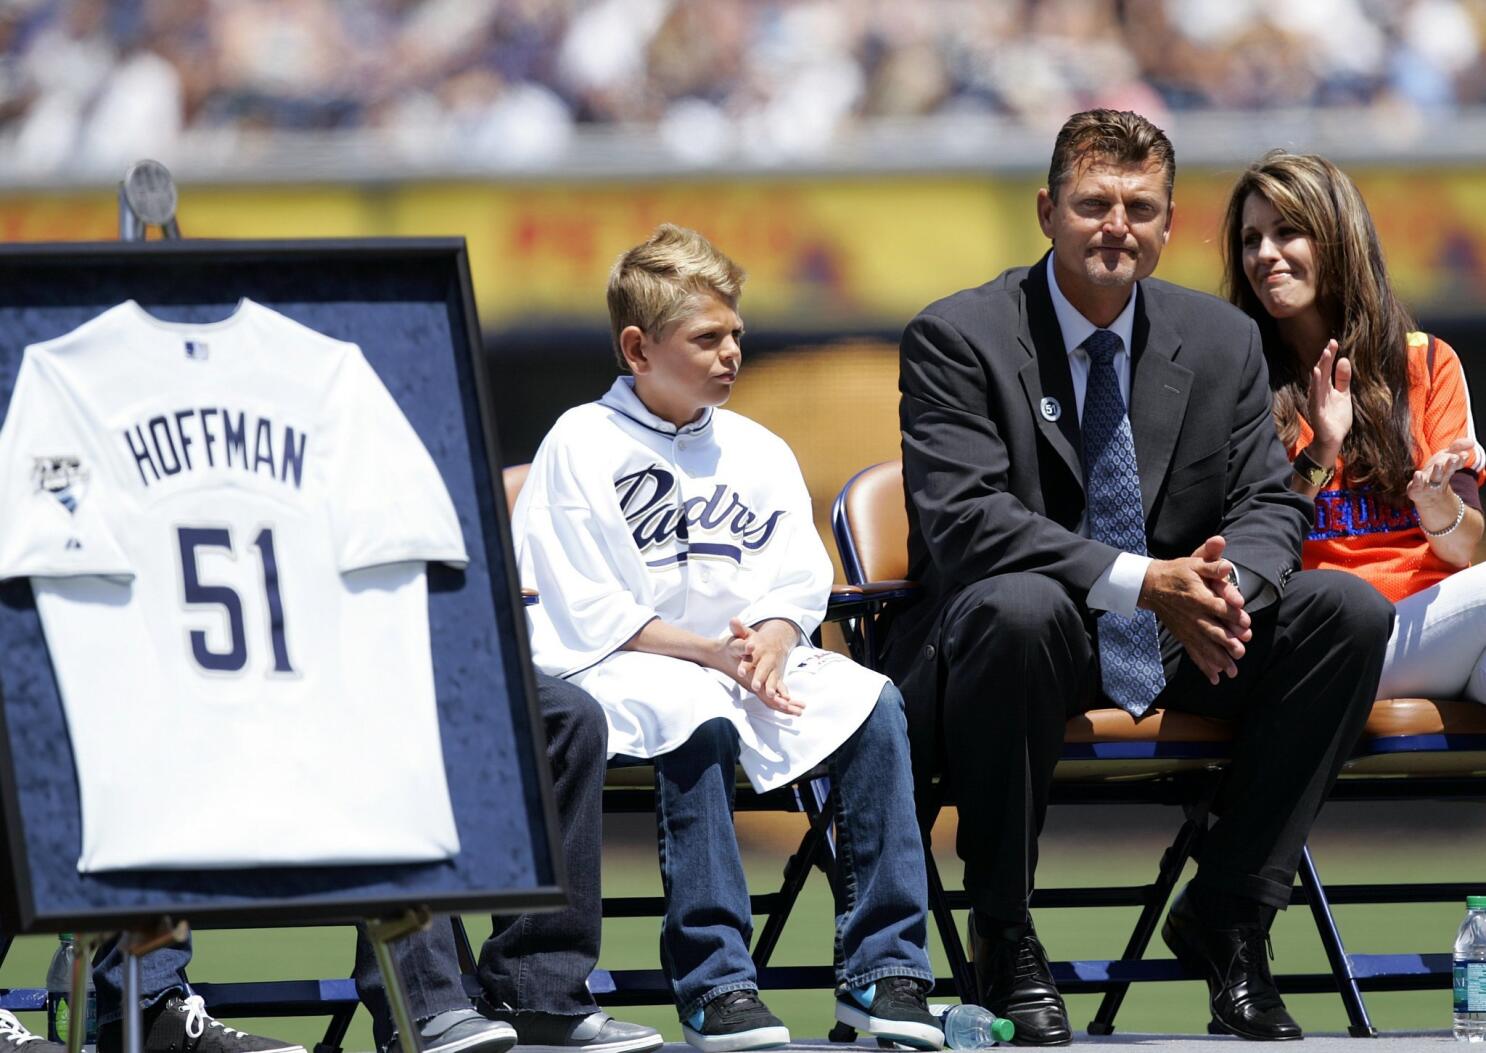 Padres history (Aug. 21): Trevor Hoffman's No. 51 retired - The